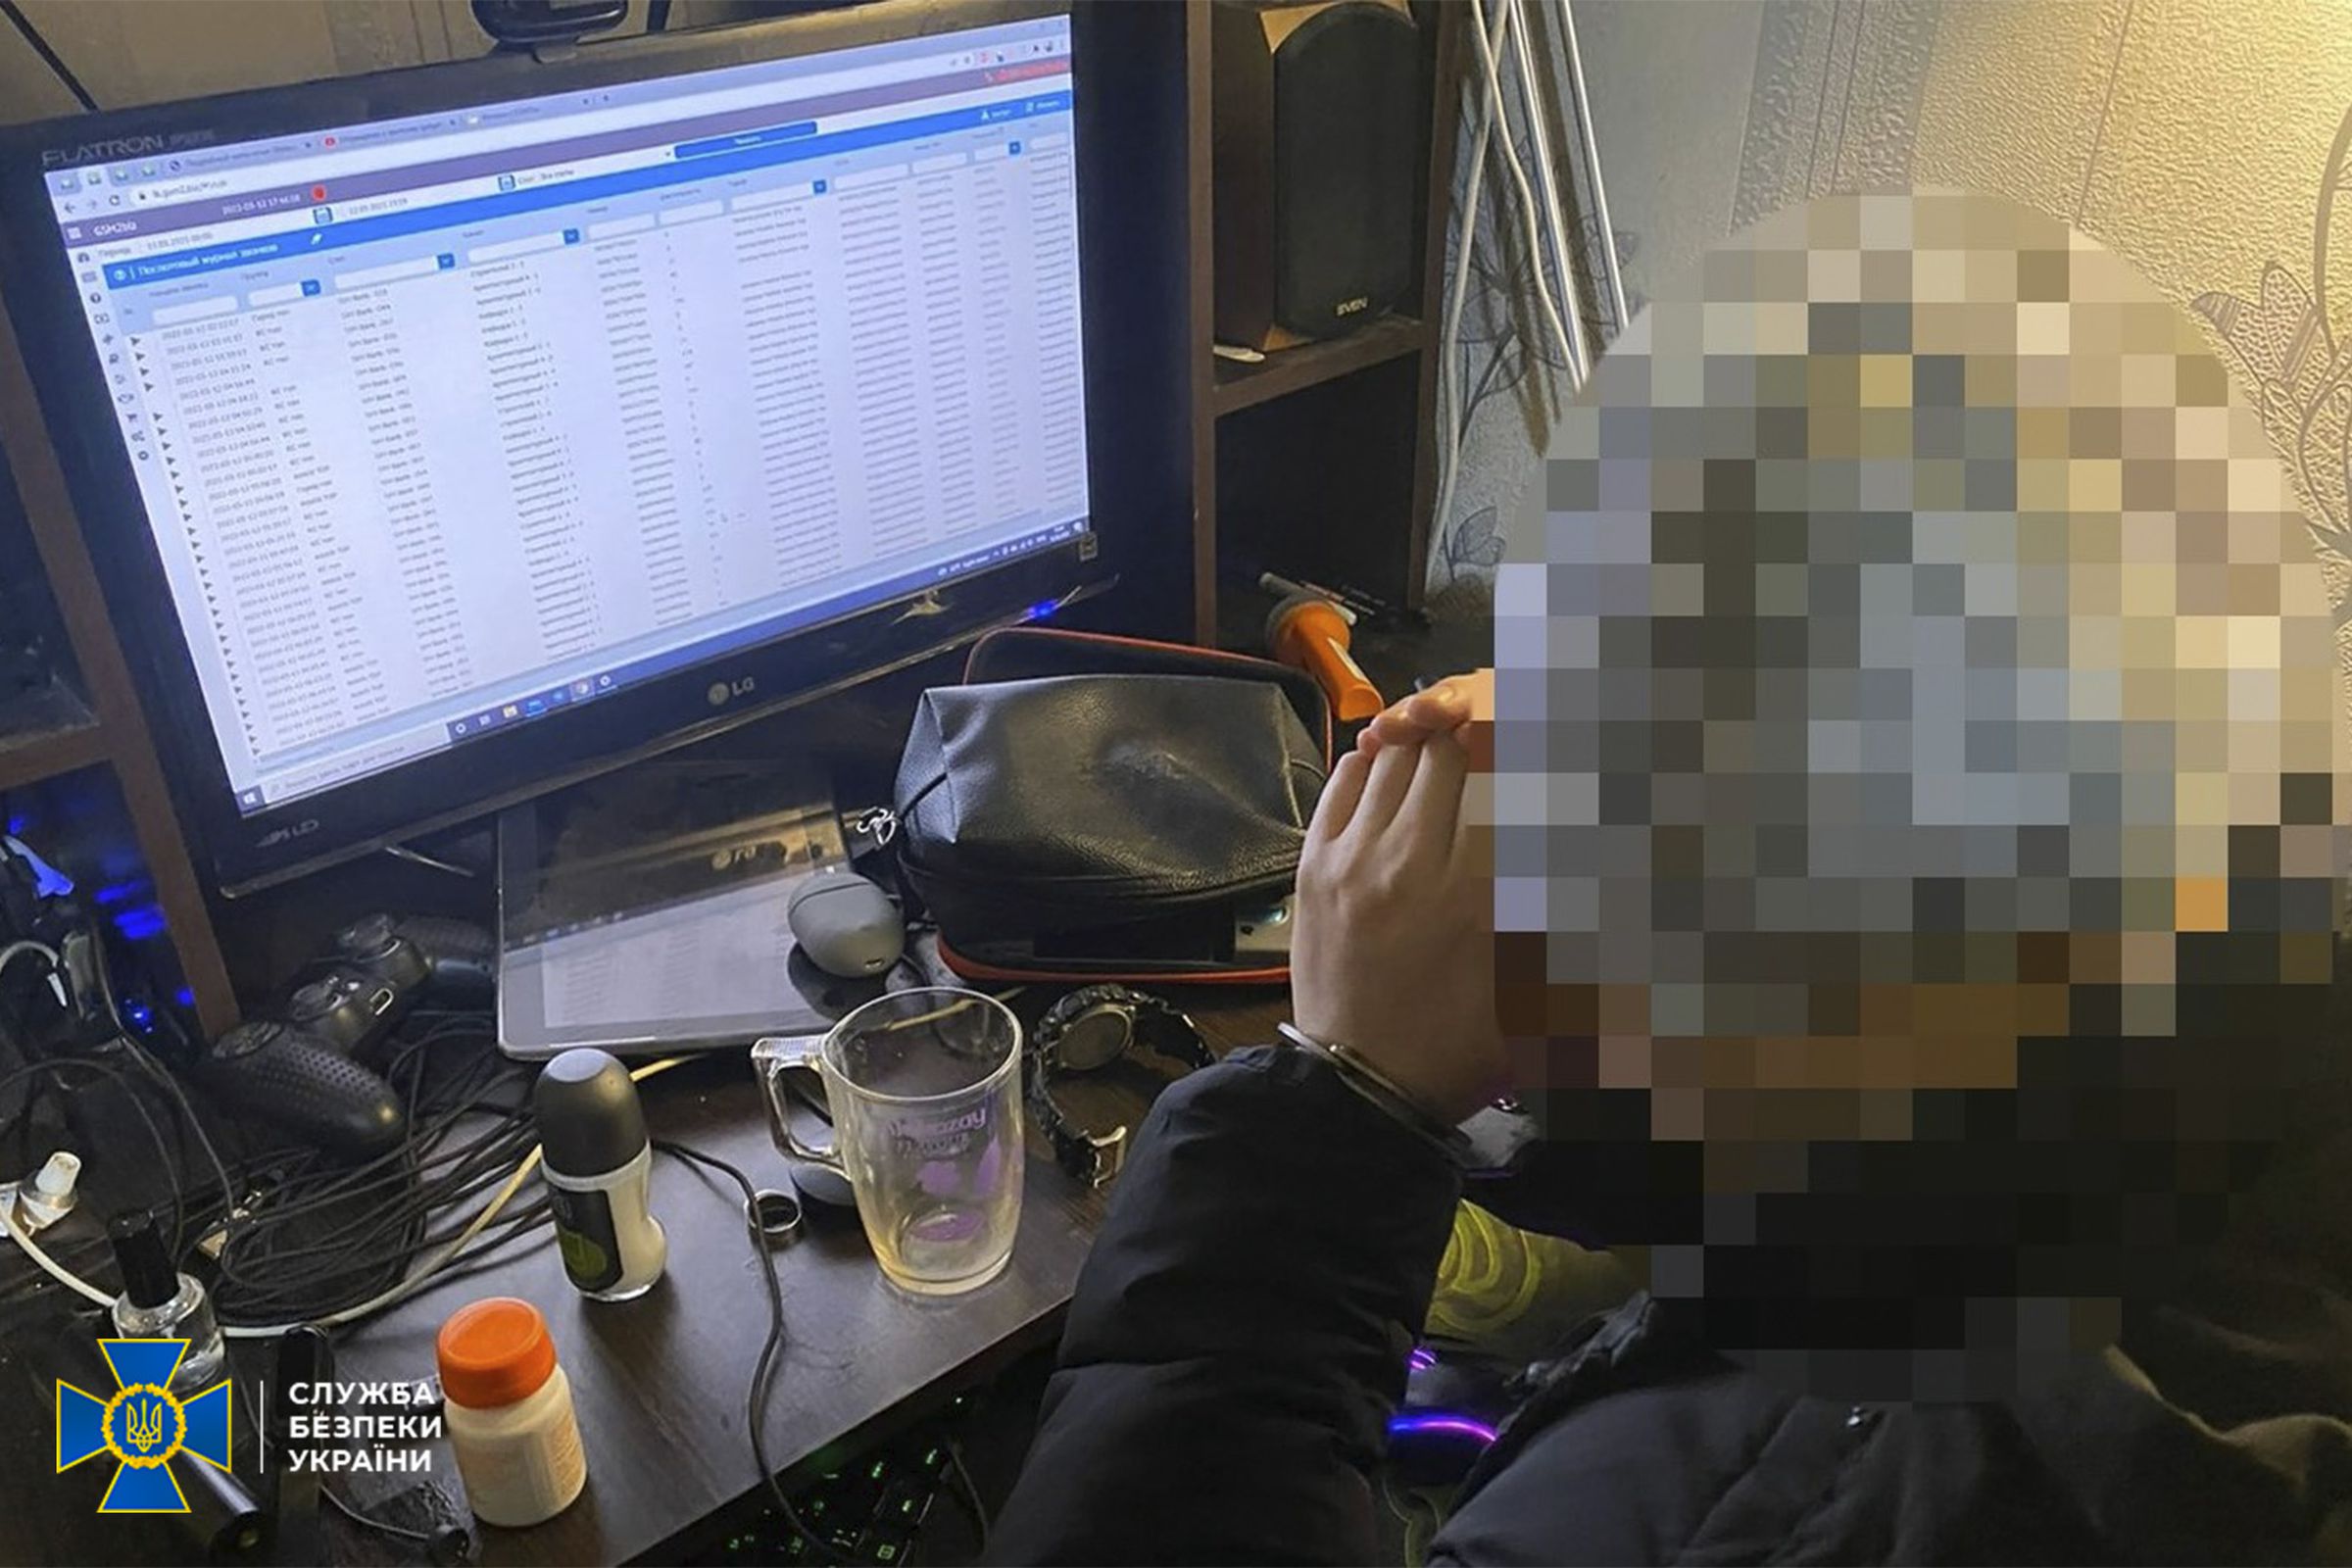 The computer workstation of an alleged hacker said to be supporting Russian troops in Ukraine.